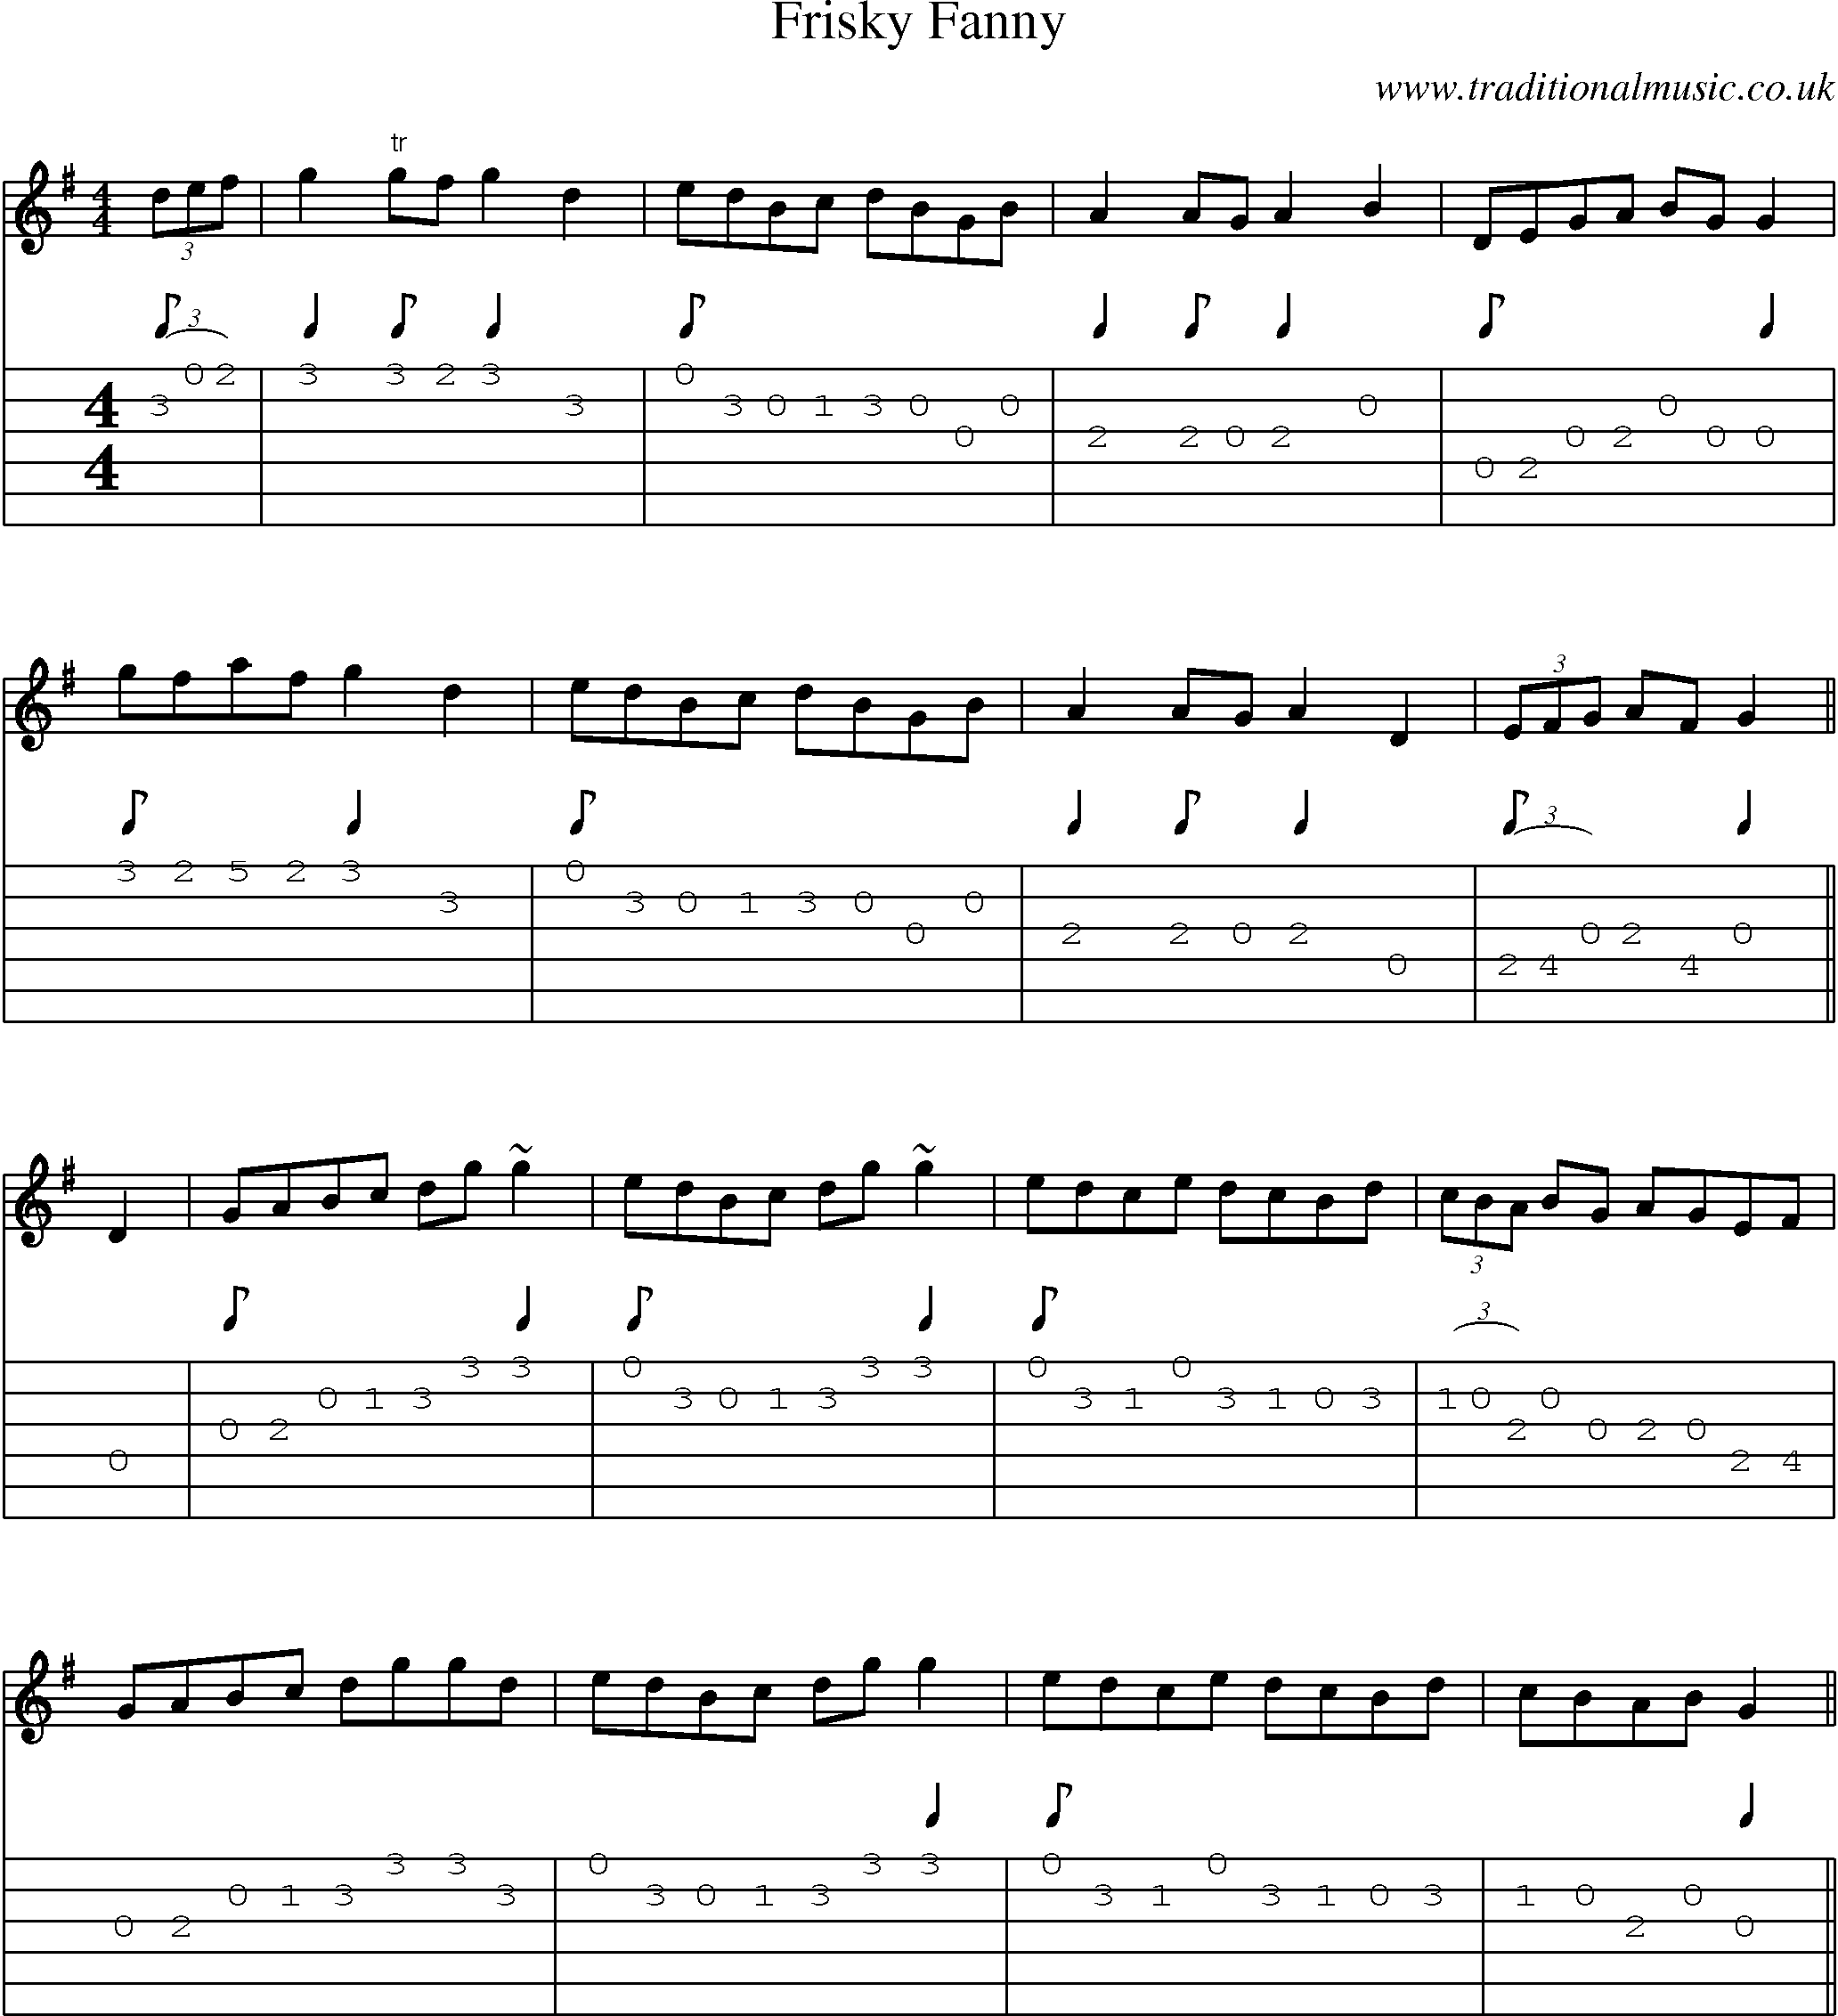 Music Score and Guitar Tabs for Frisky Fanny